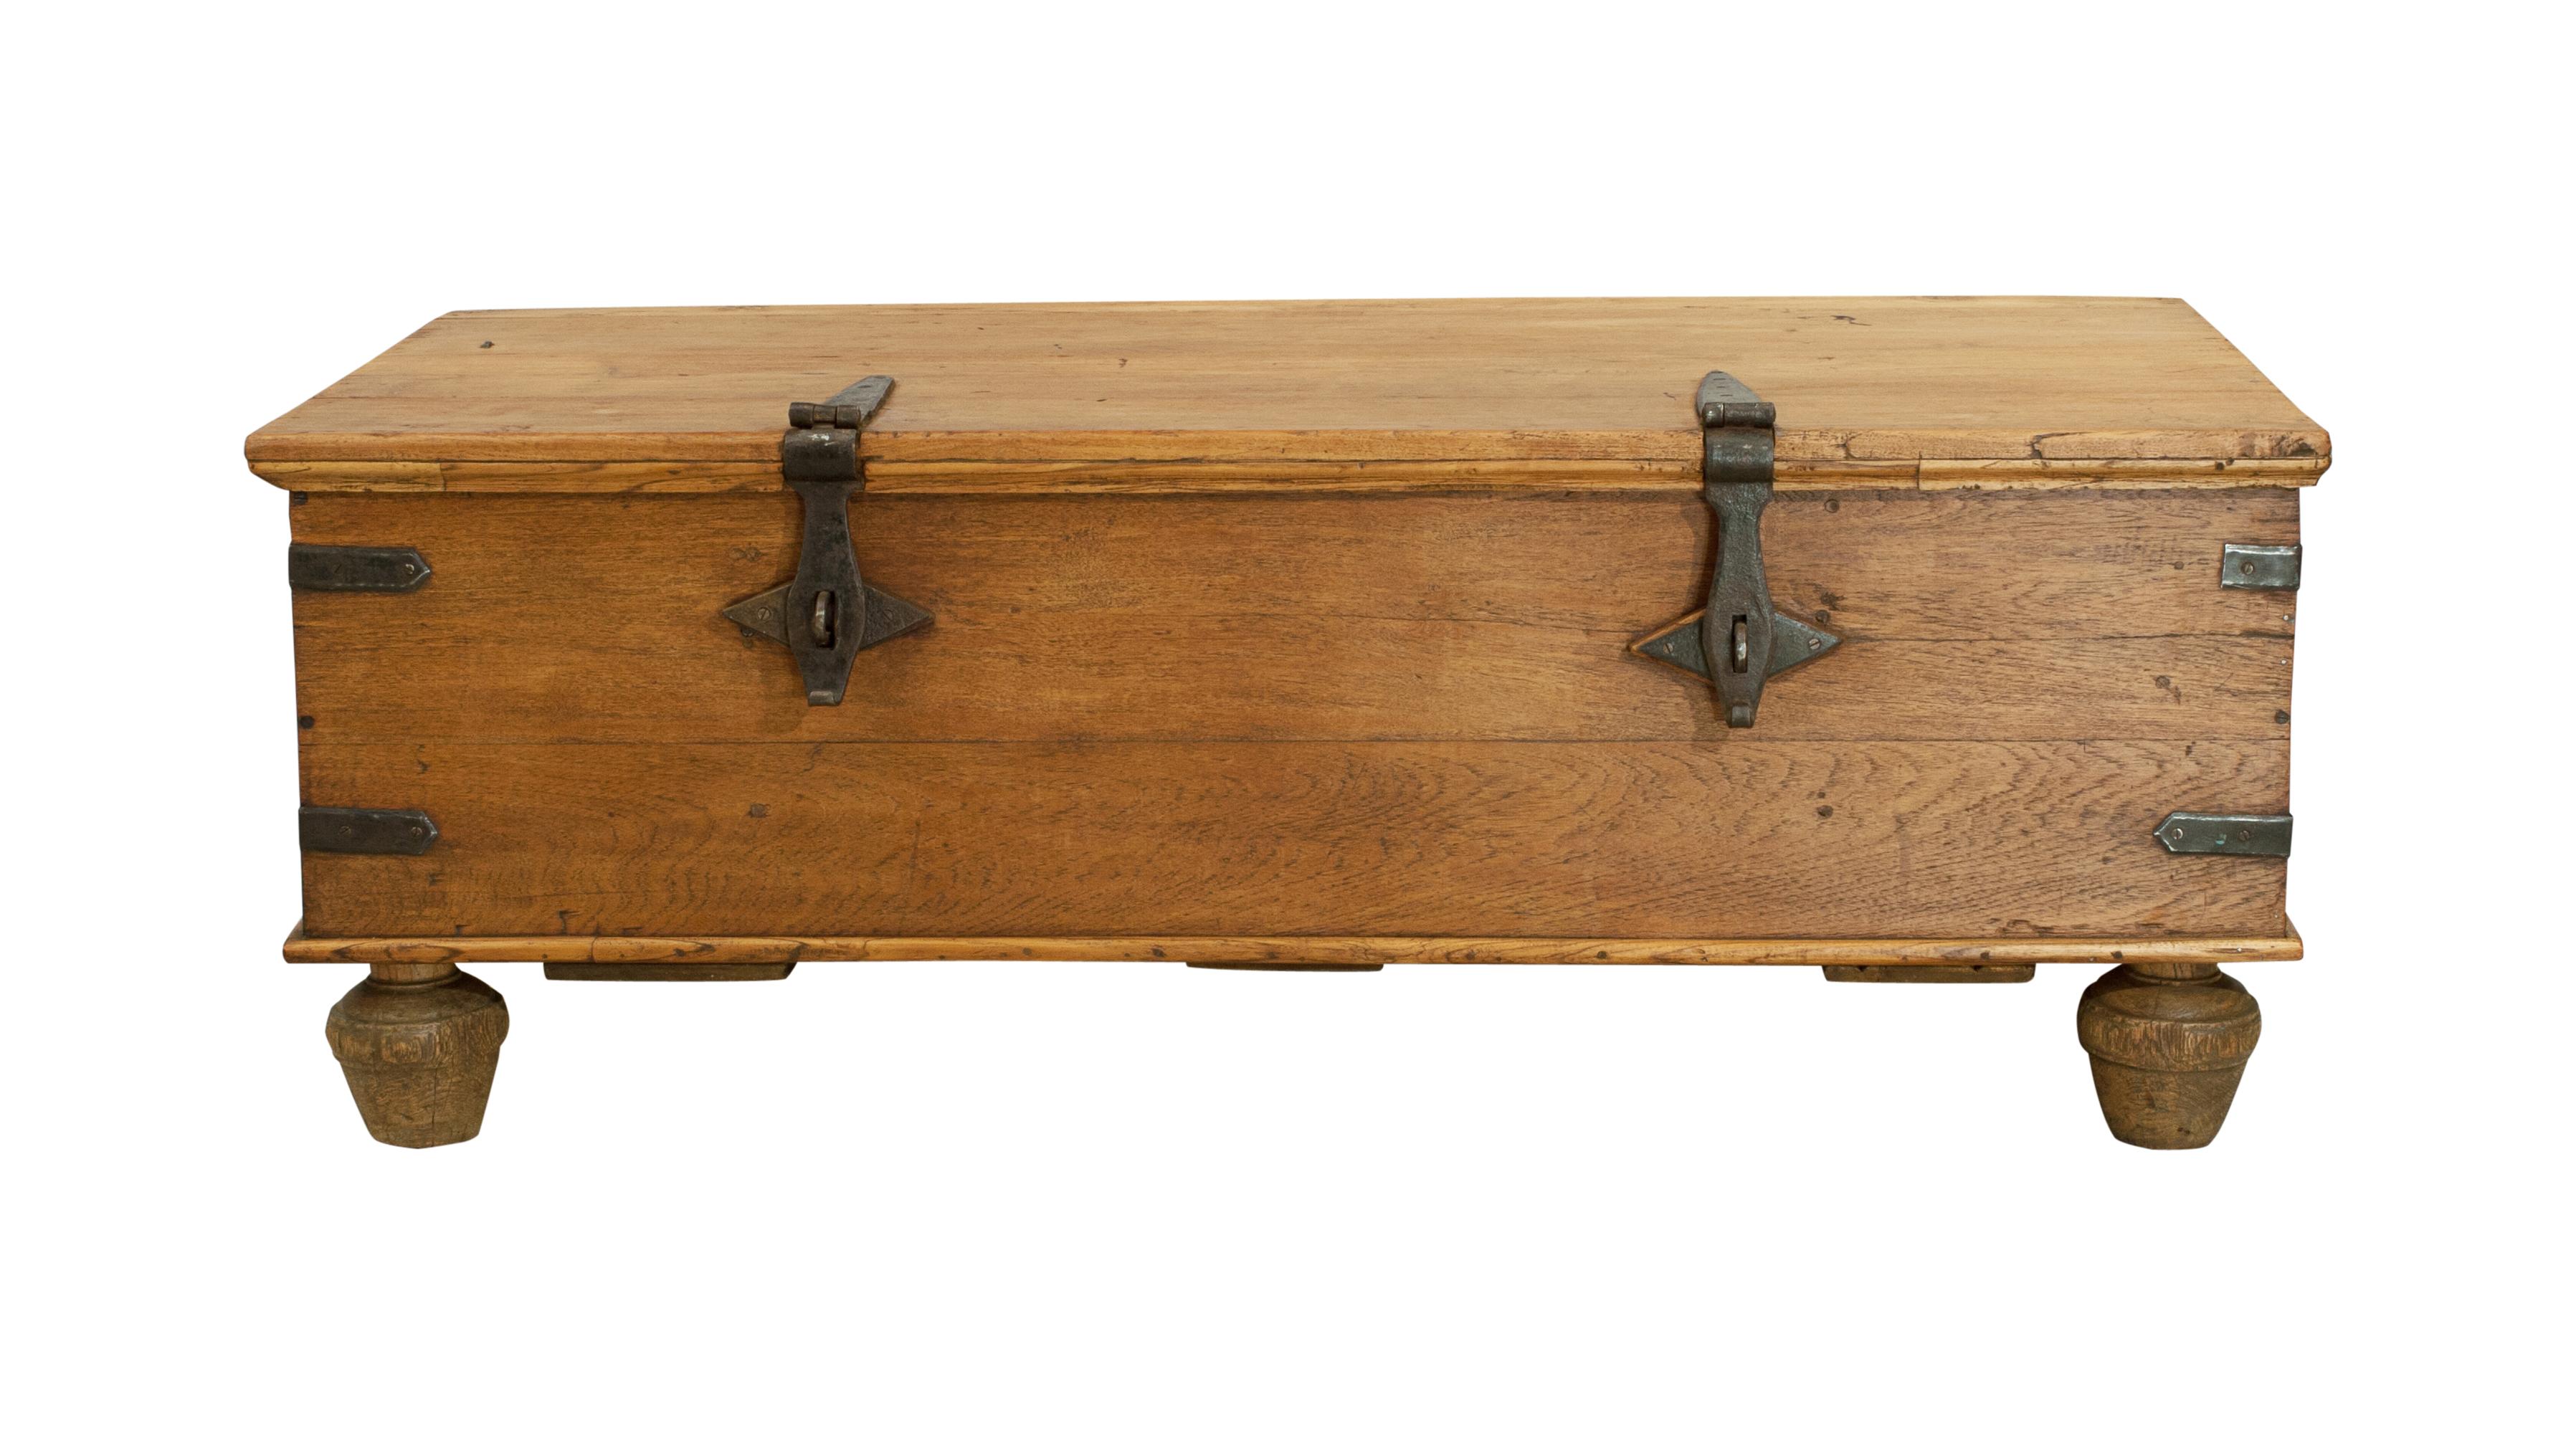 Vintage coffee table chest.
This beautiful large solid teak coffee table trunk has ample inner storage, can be used as a handy storage coffee table, blanket box or for any other household storage. Raised on four turned wooden feet. A great piece of